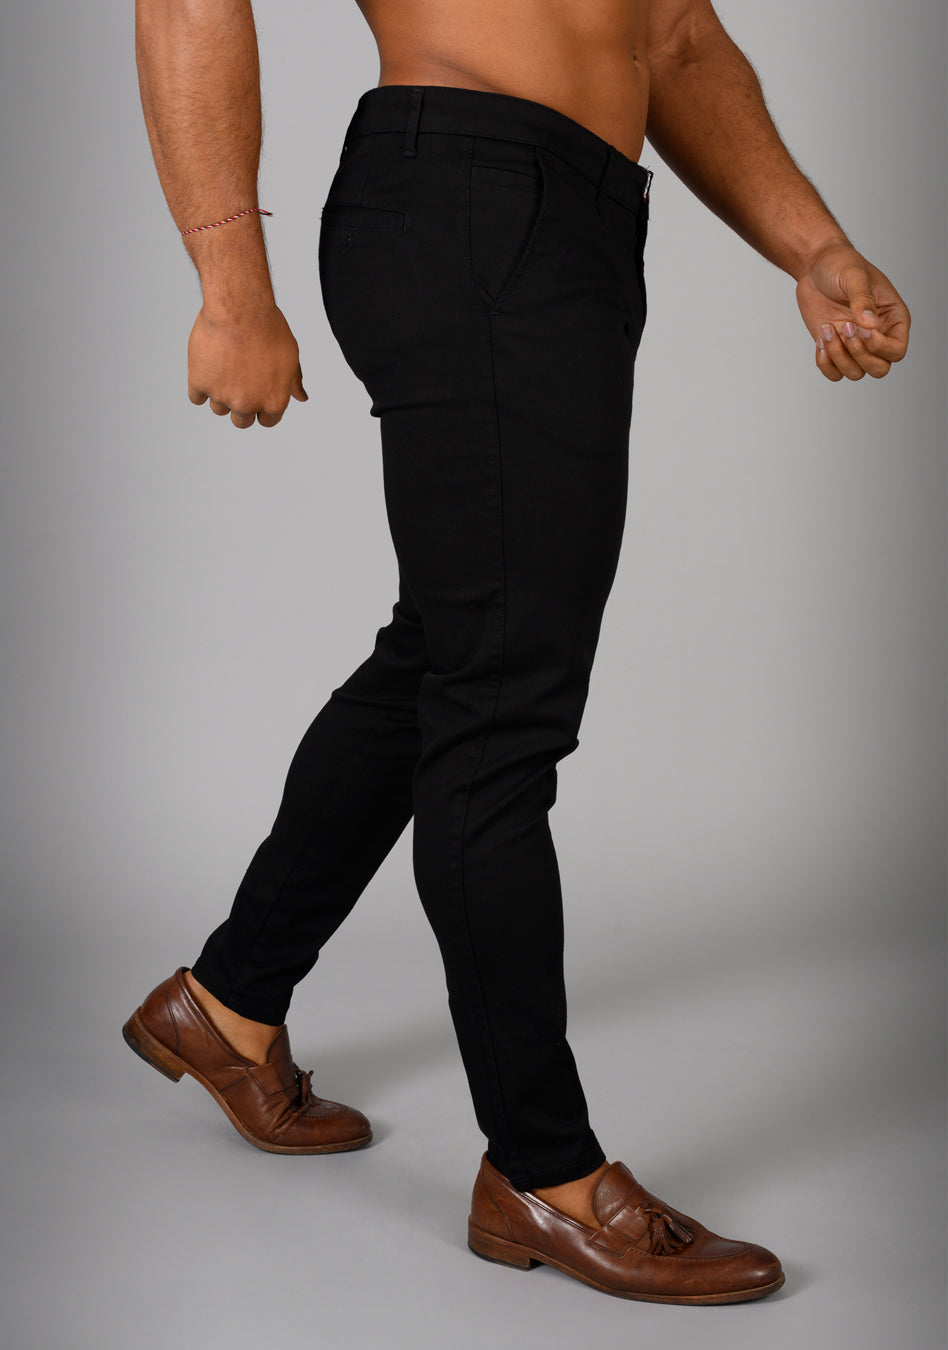 Oxcloth Black Athletic fit chinos offering a perfect blend of comfort and style for well-built physiques, with a contoured waist and muscle fit design for an on-trend appearance.